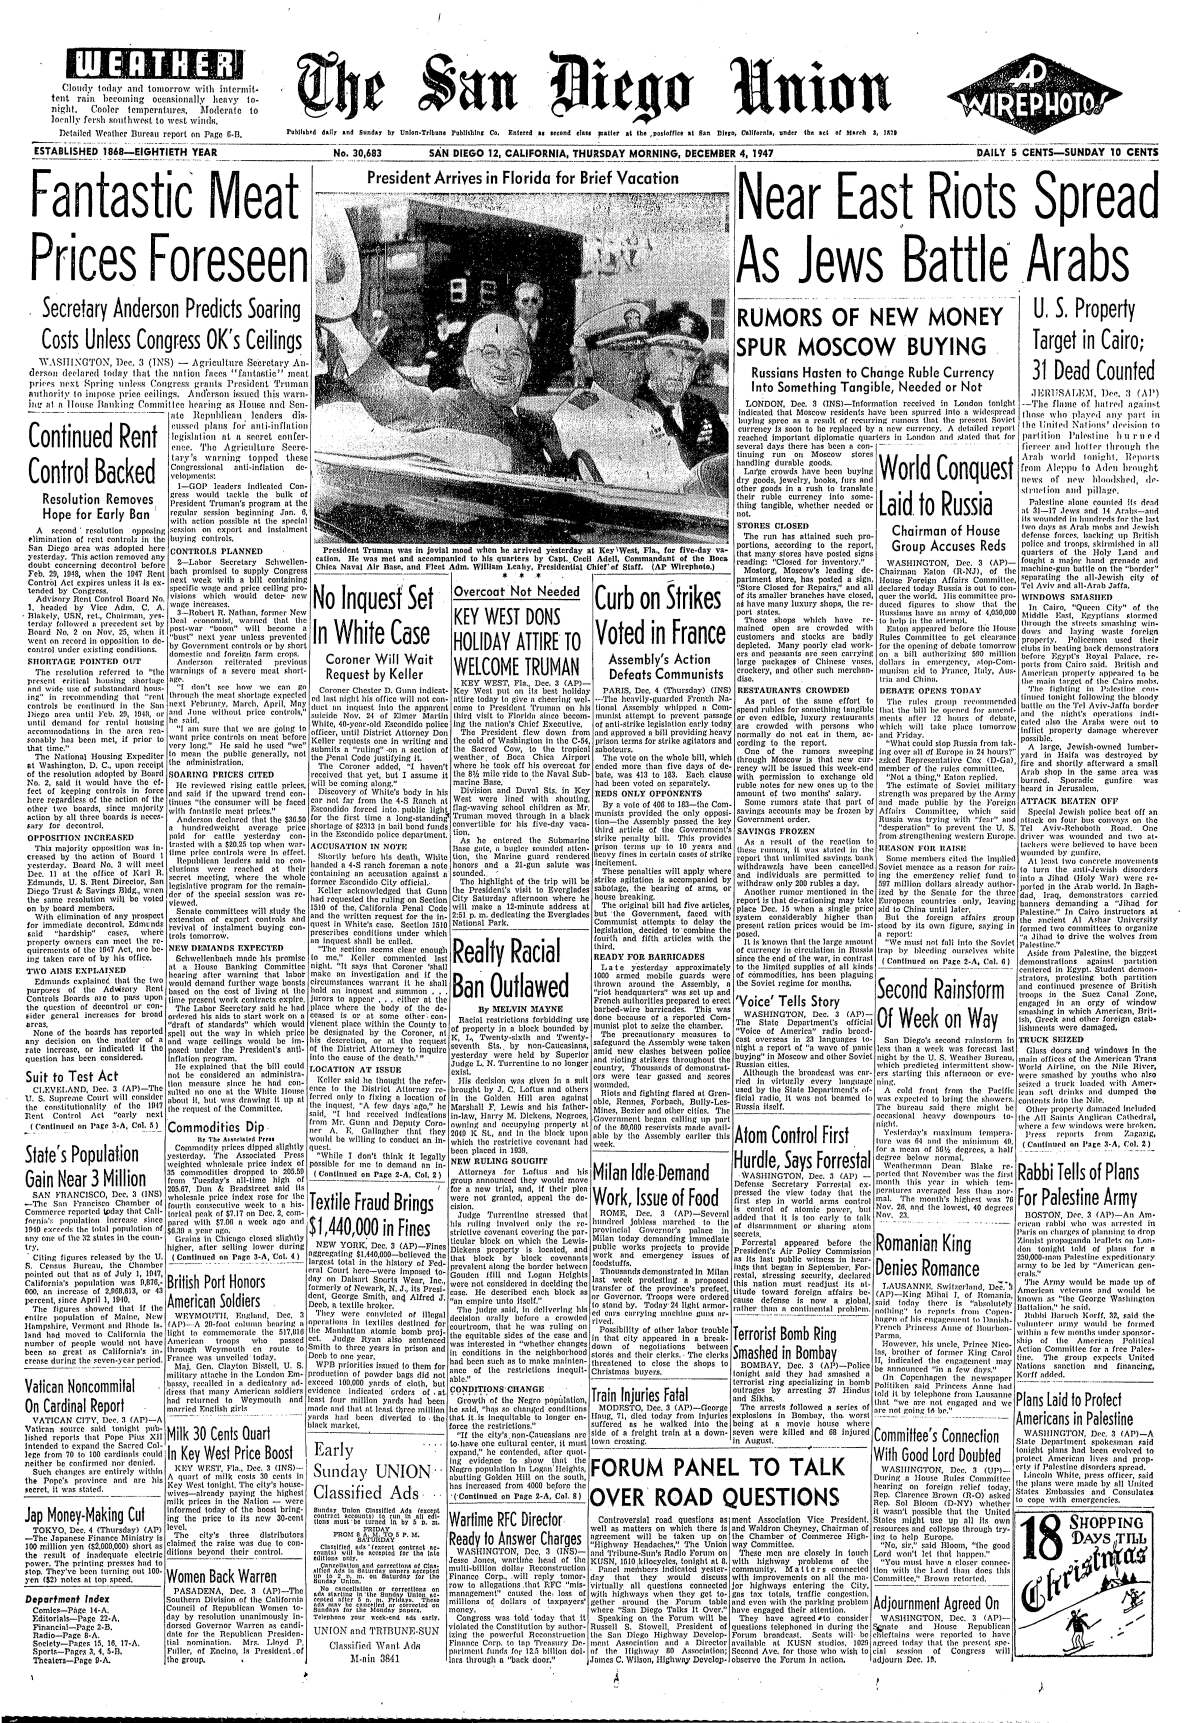 Front page of The San Diego Union, Dec. 4, 1947.